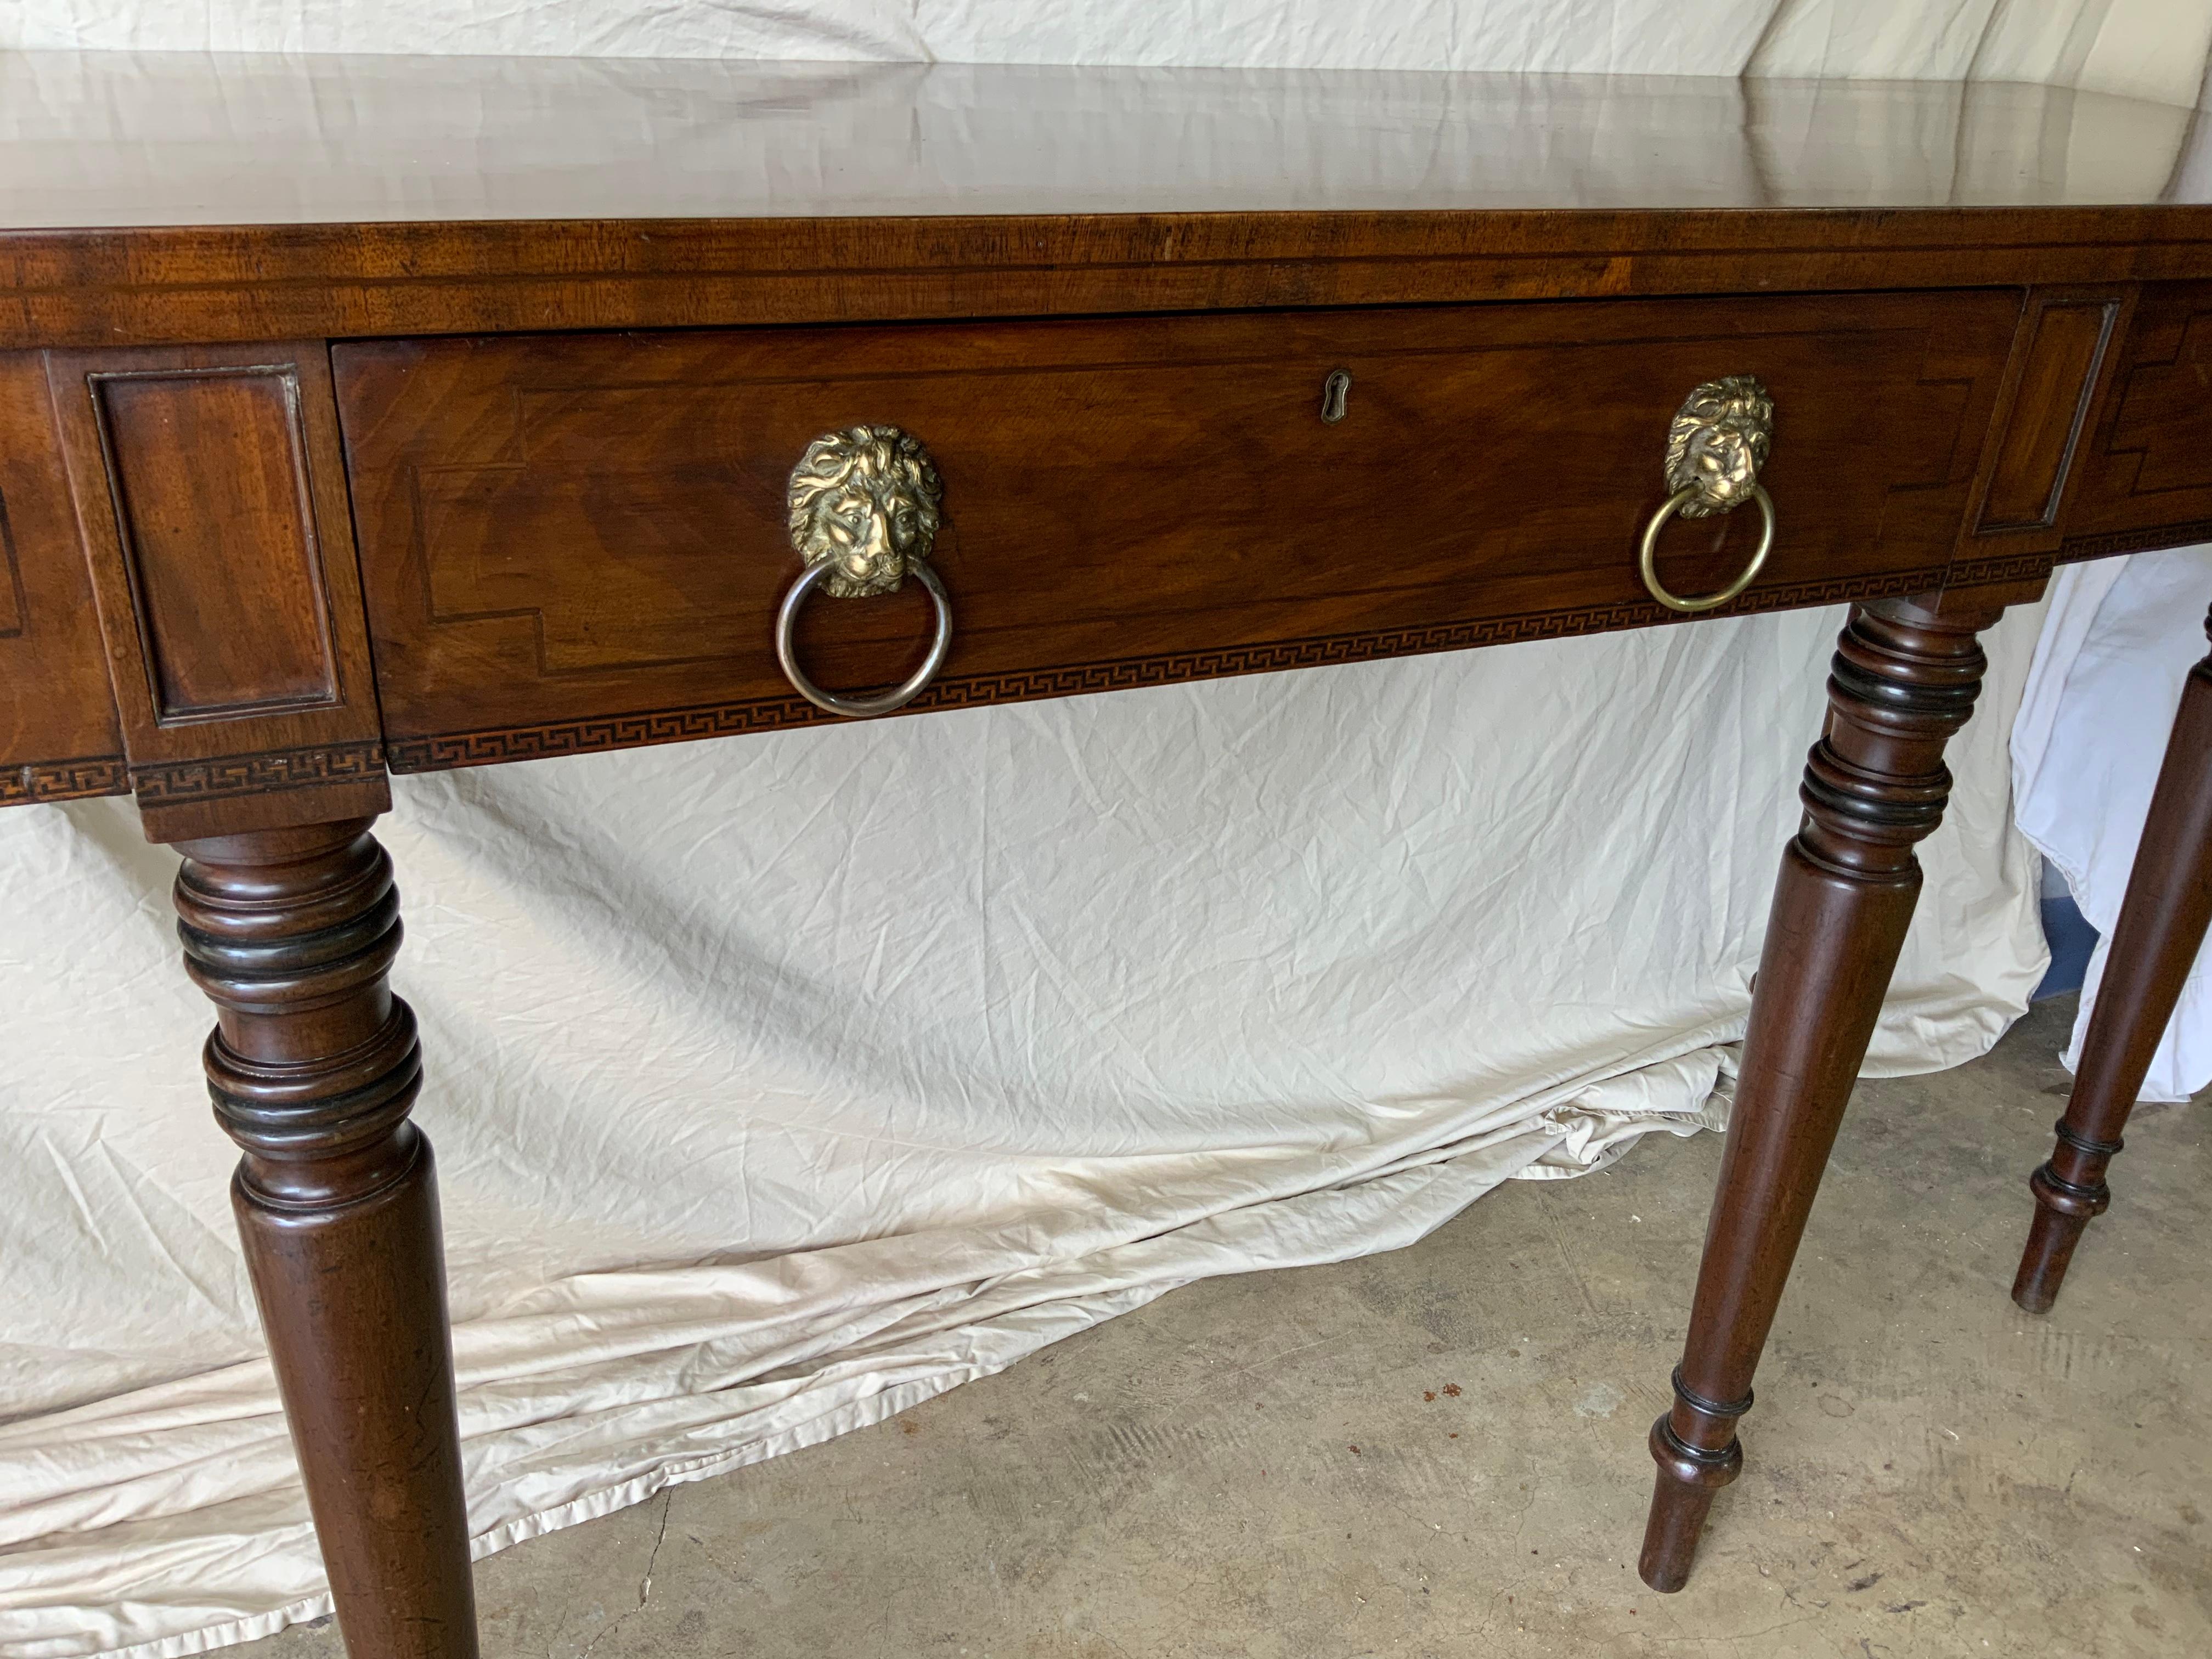 A very nice early 19th century Sheraton Mahogany Sideboard / Server 1830-40. Very nice color and aged patina on the original surface. One large solid Mahogany board top over a figured Mahogany drawer frieze with a Greek key inlay resting on six